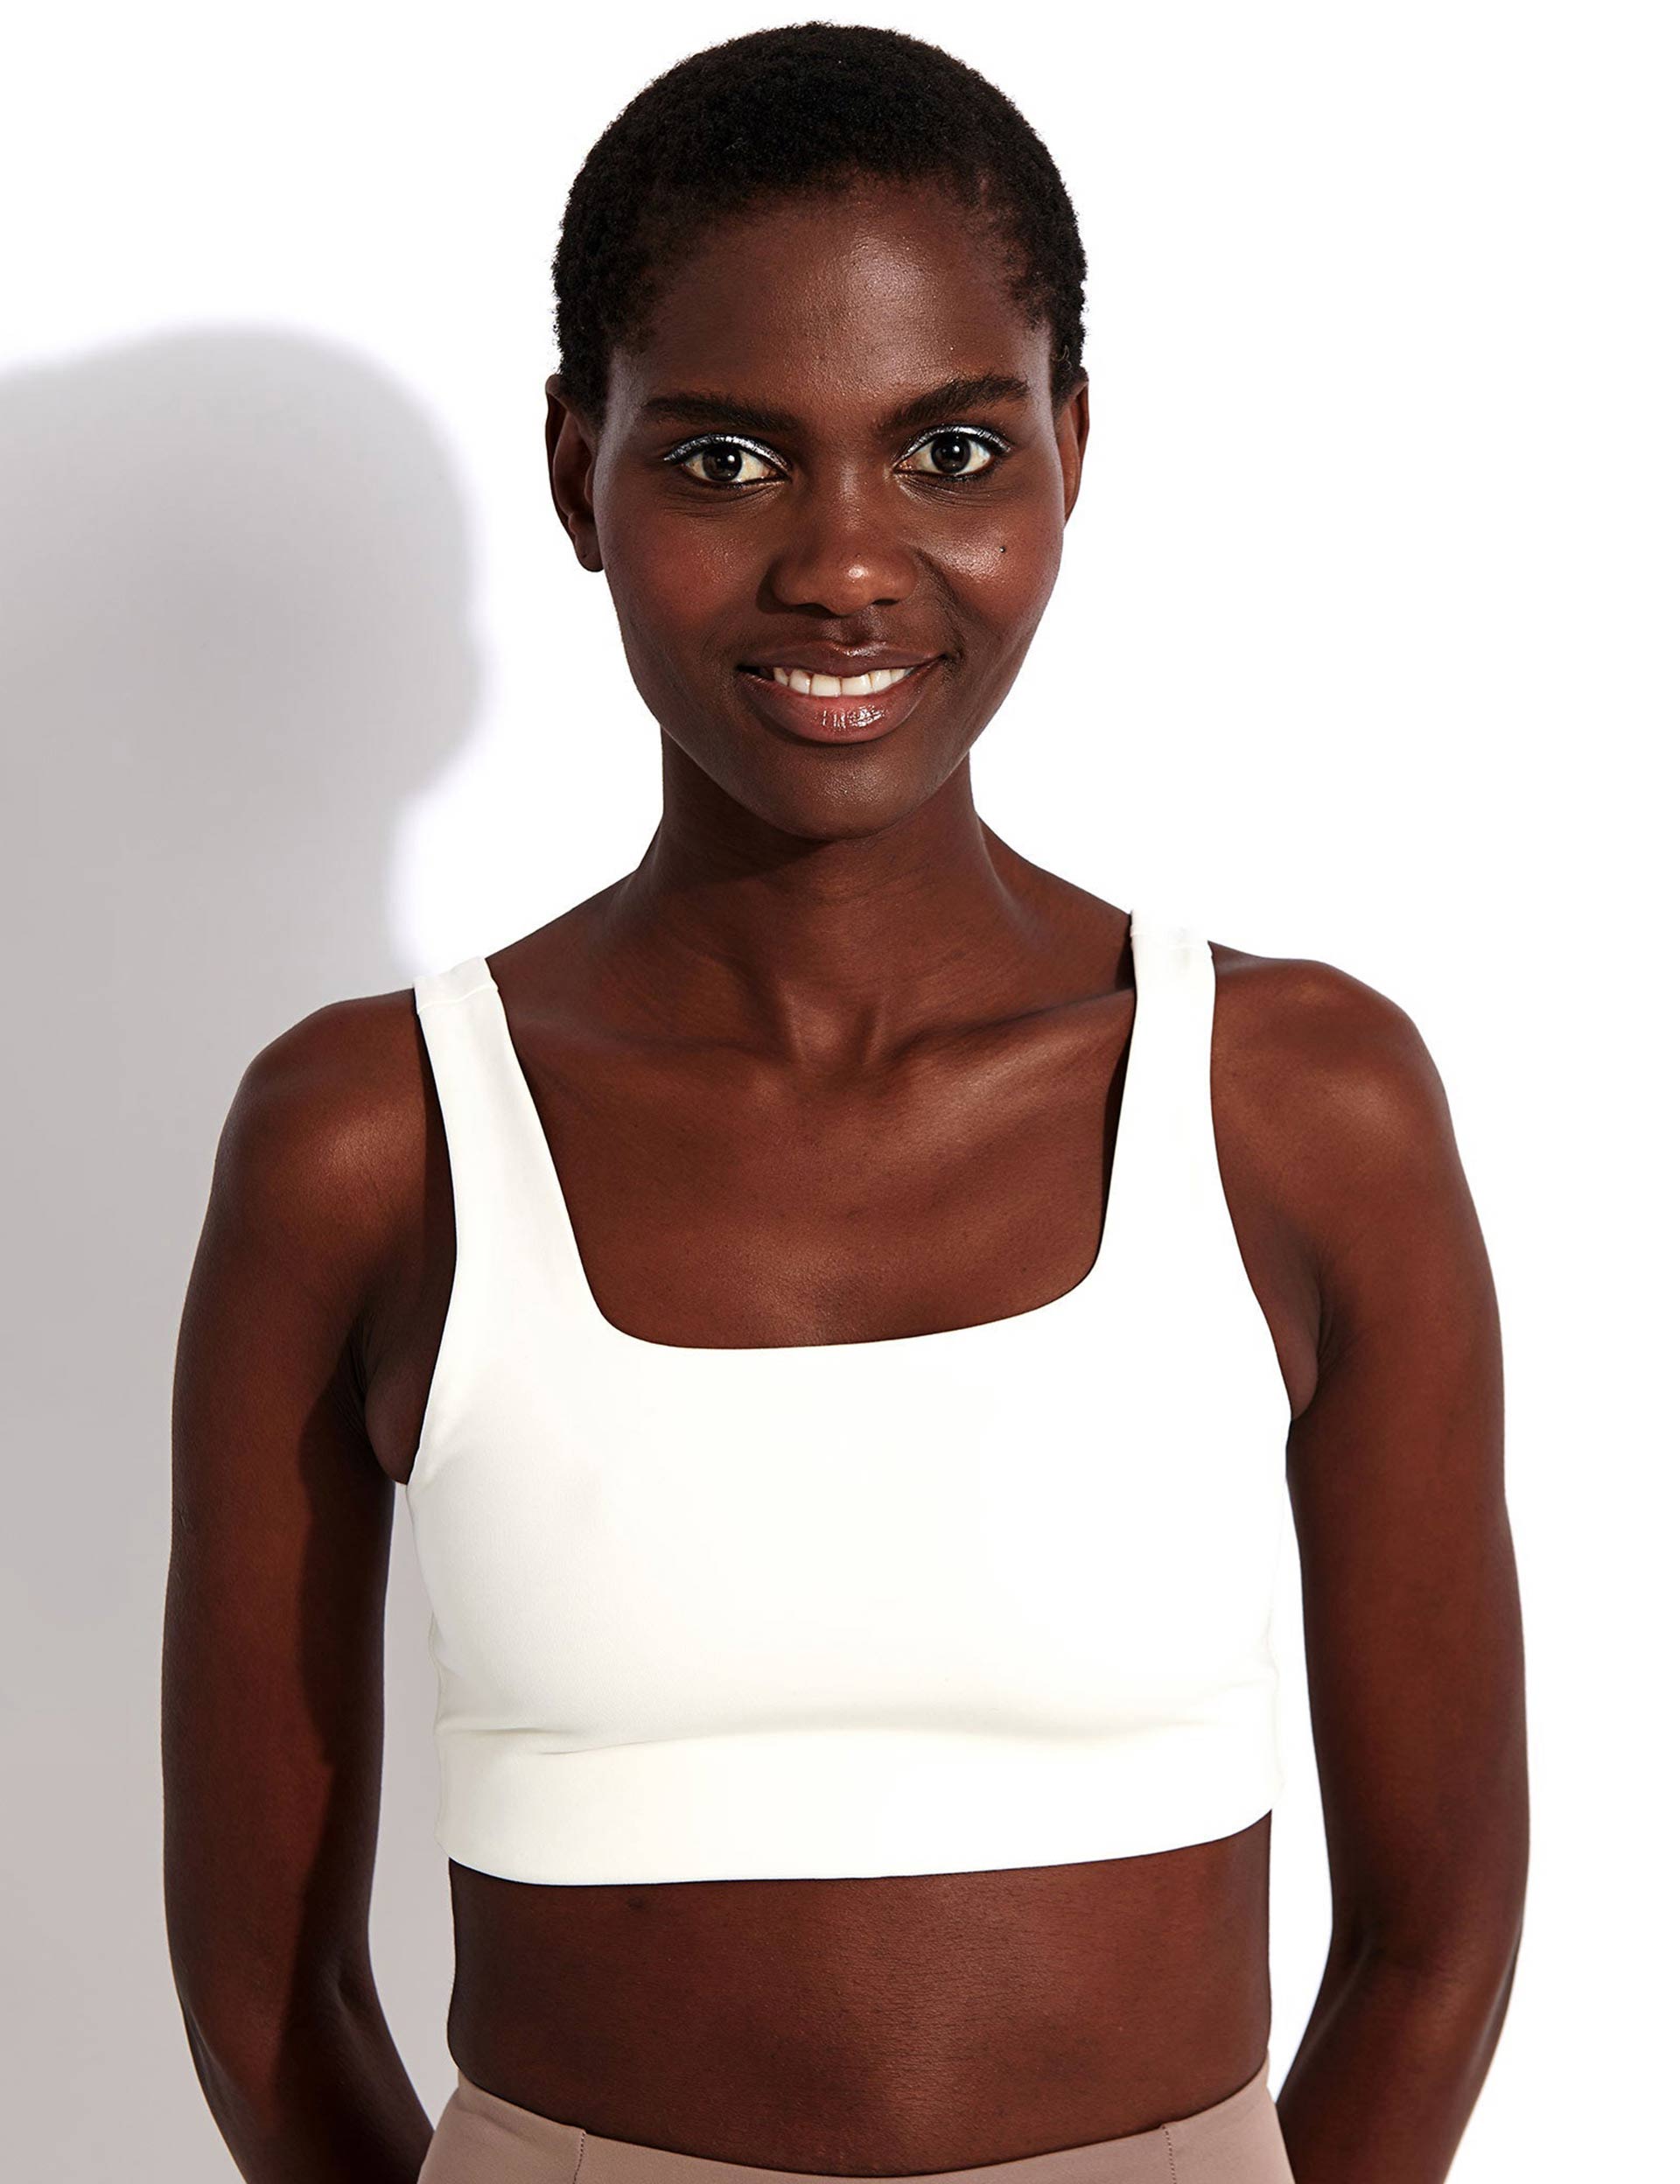 Girlfriend Collective Tommy Sports Bra, Moon